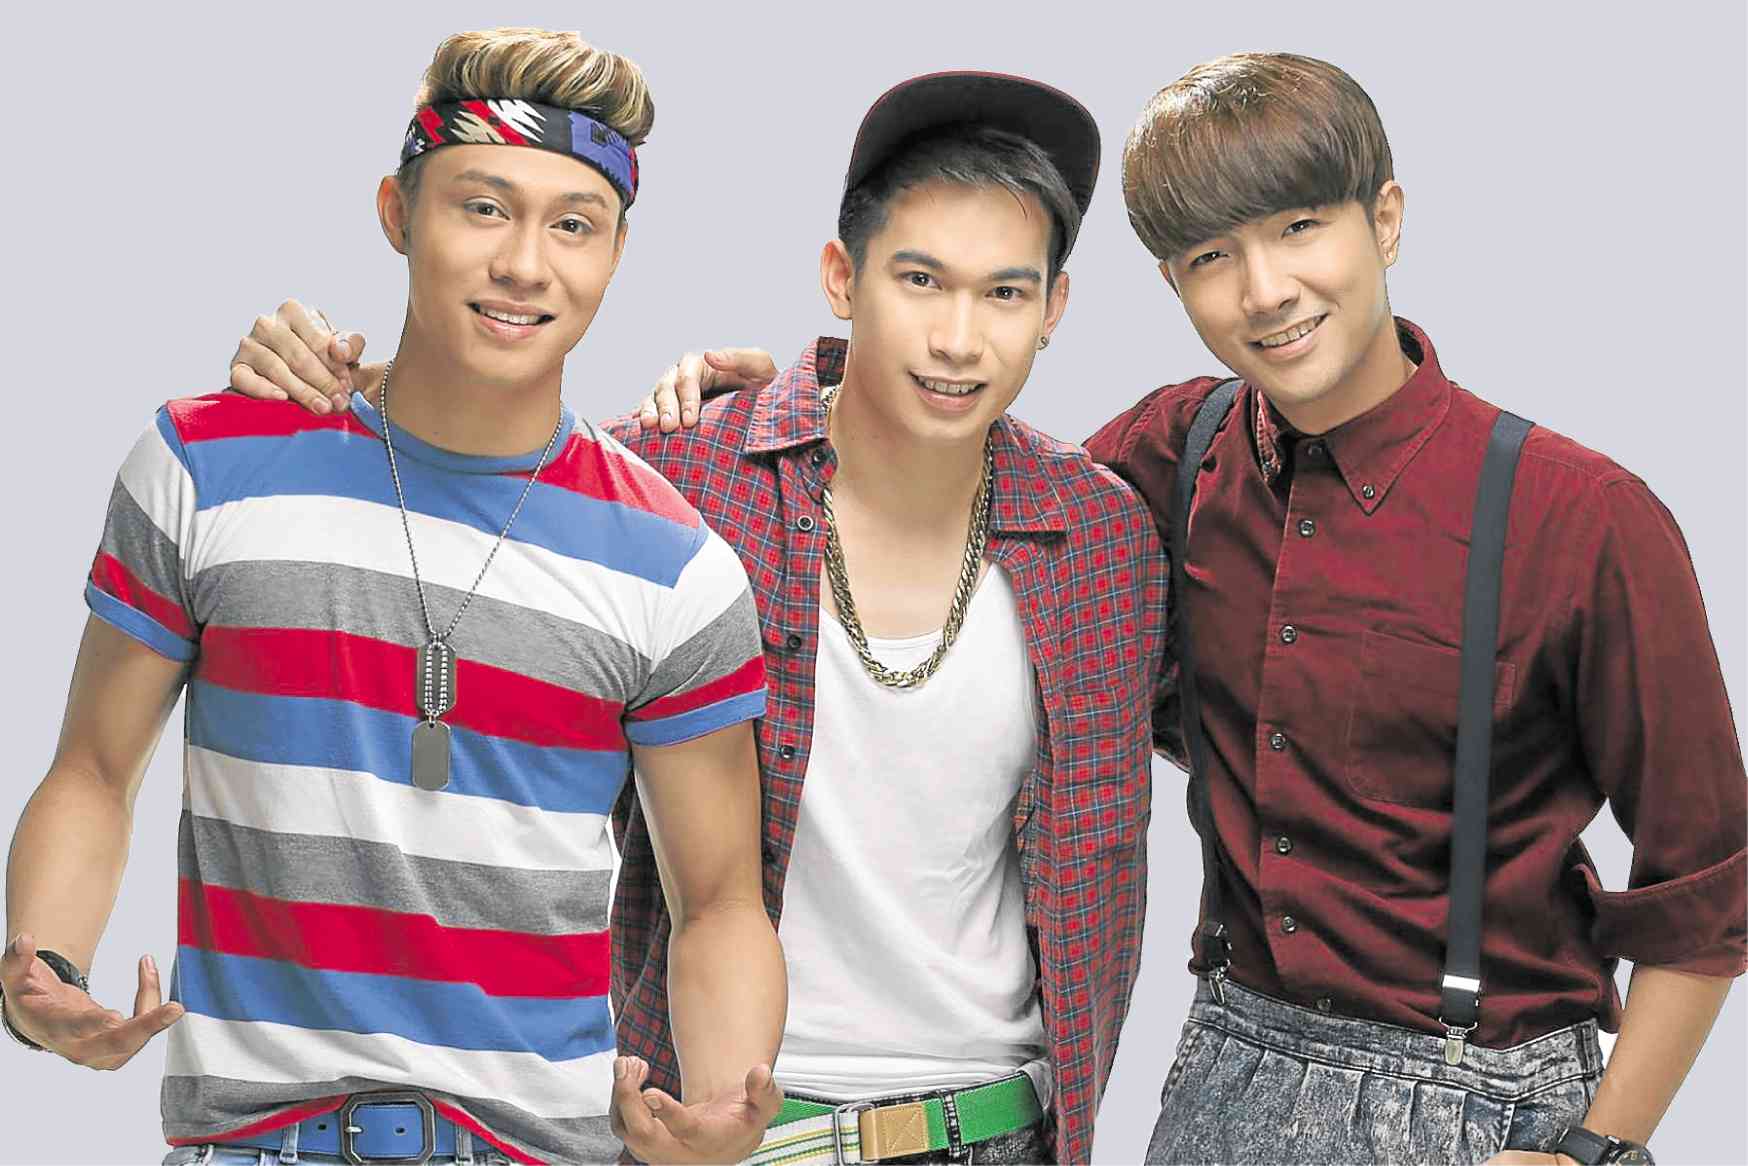 PH trio JBK on life after ‘X Factor UK’